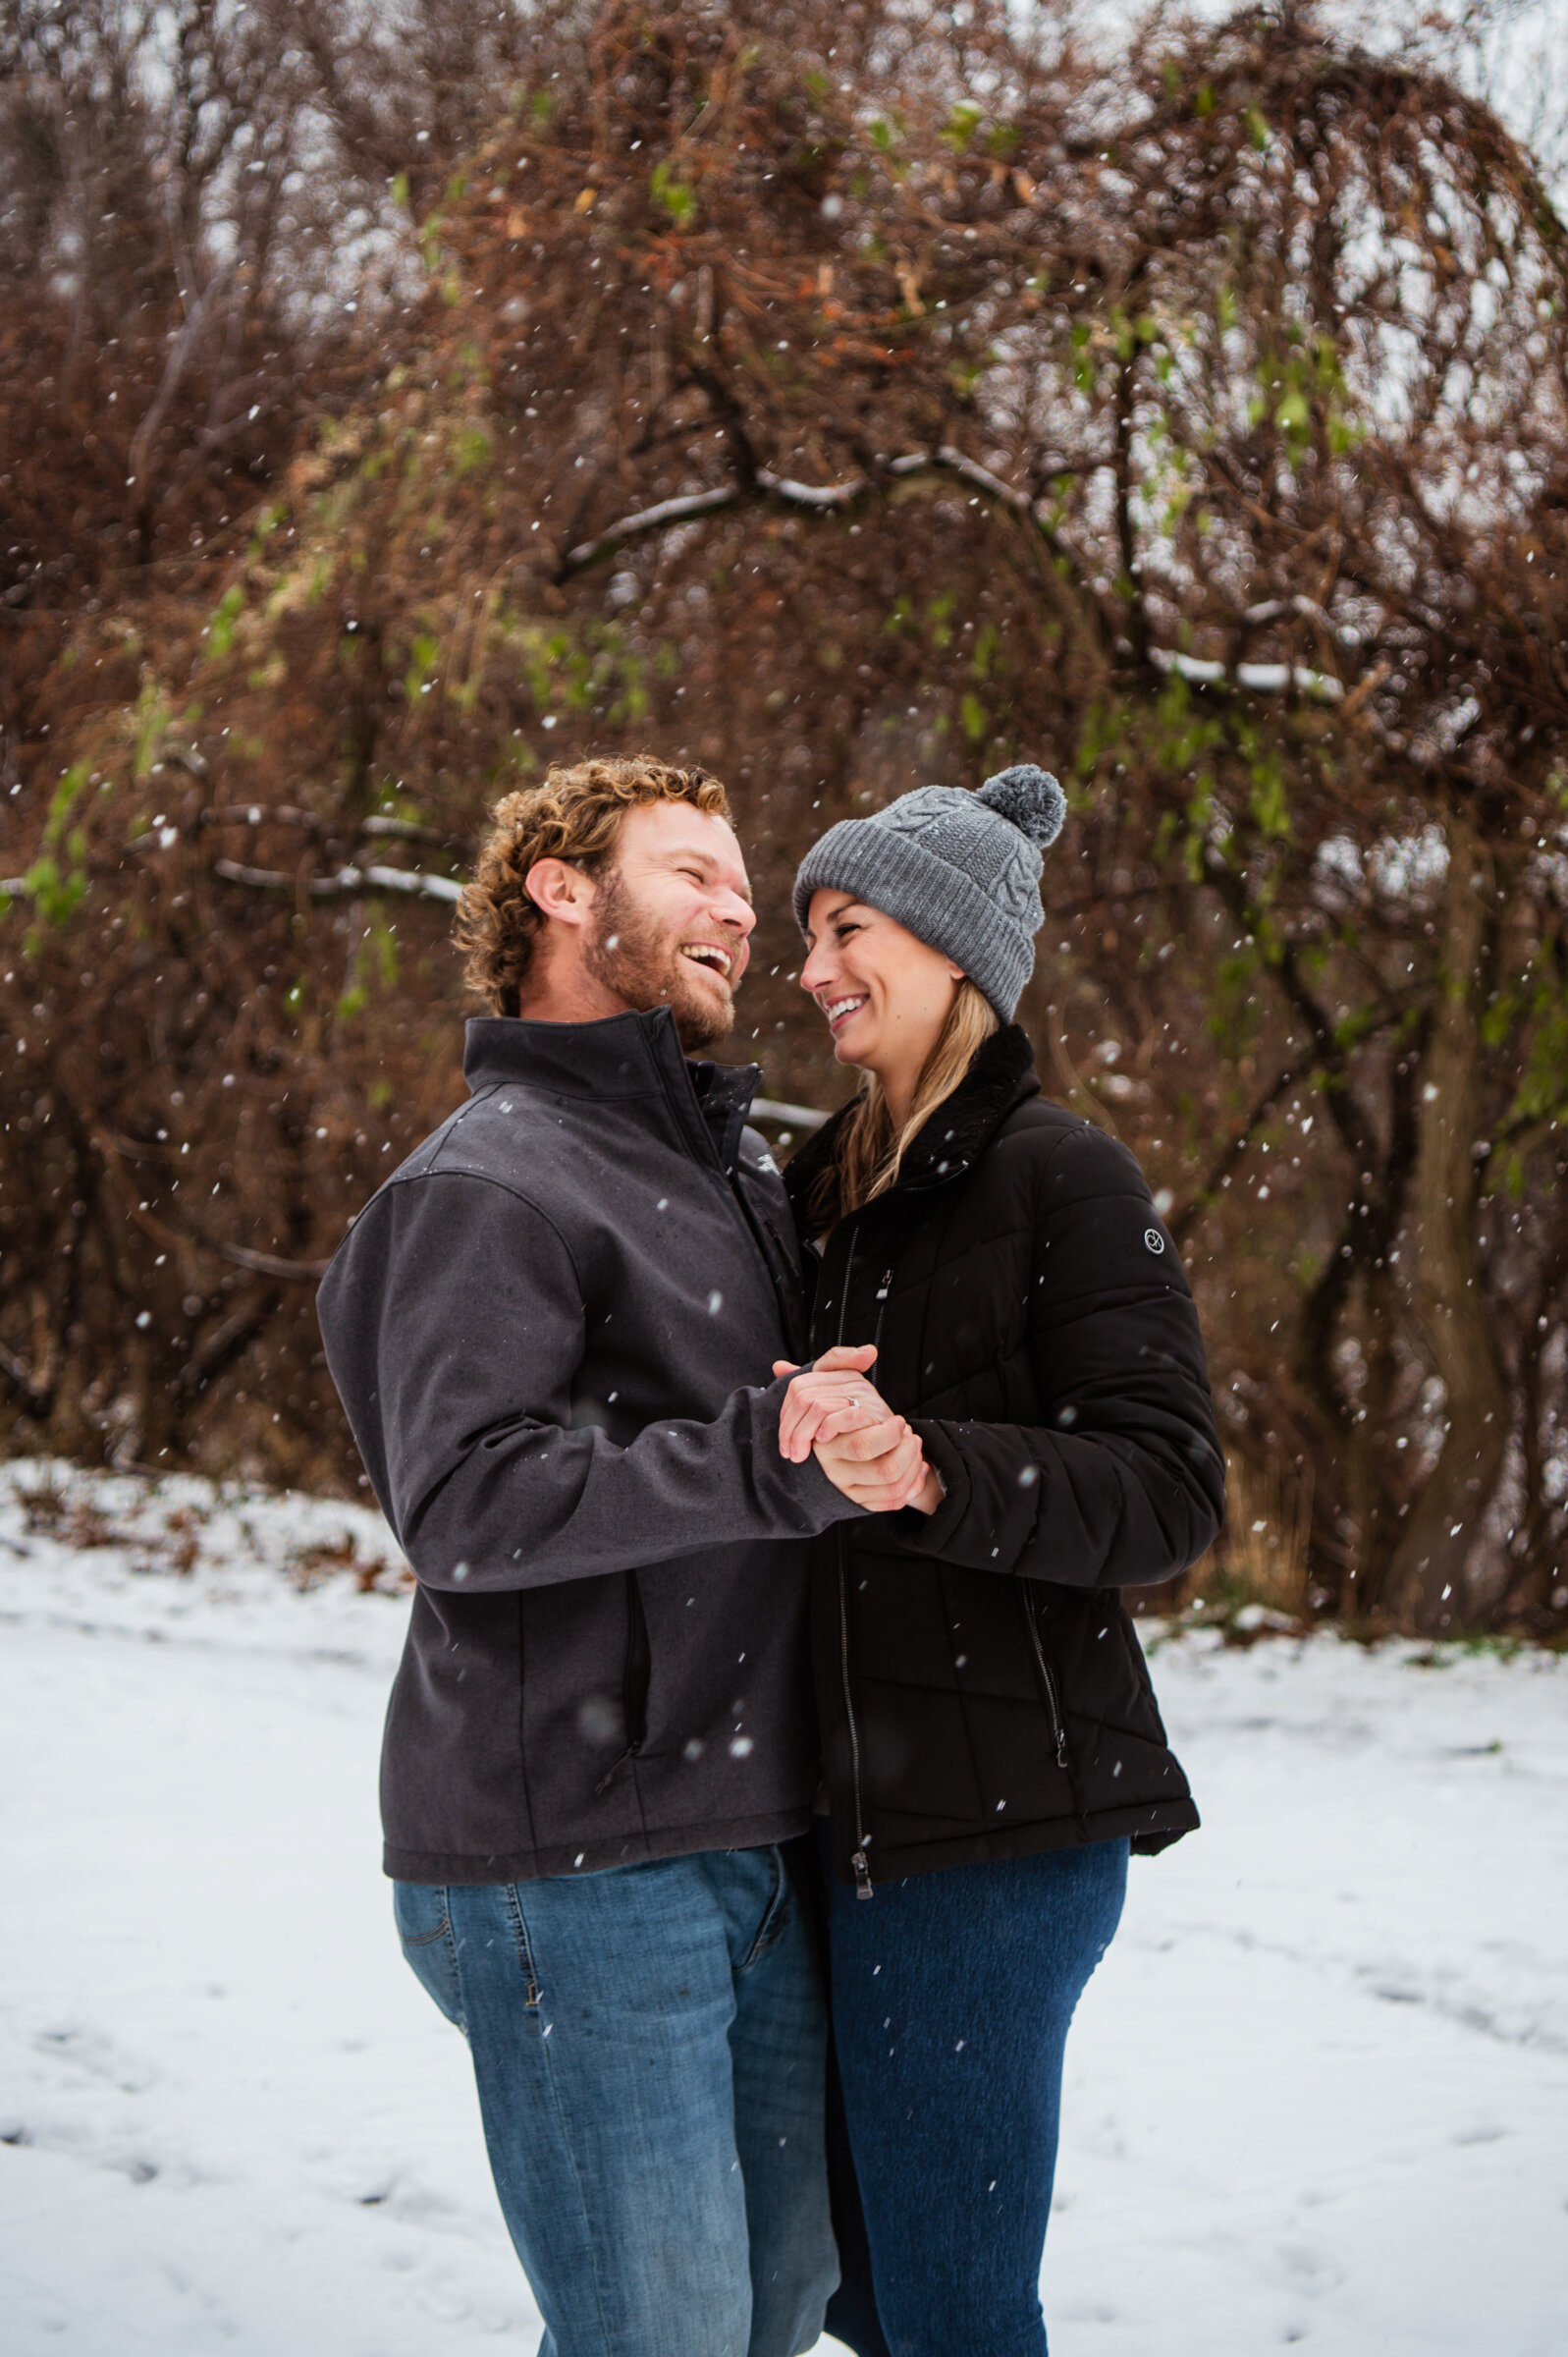 Irondequoit_Beer_Company_Durand_Eastman_Park_Rochester_Engagement_Session_JILL_STUDIO_Rochester_NY_Photographer_7152.jpg